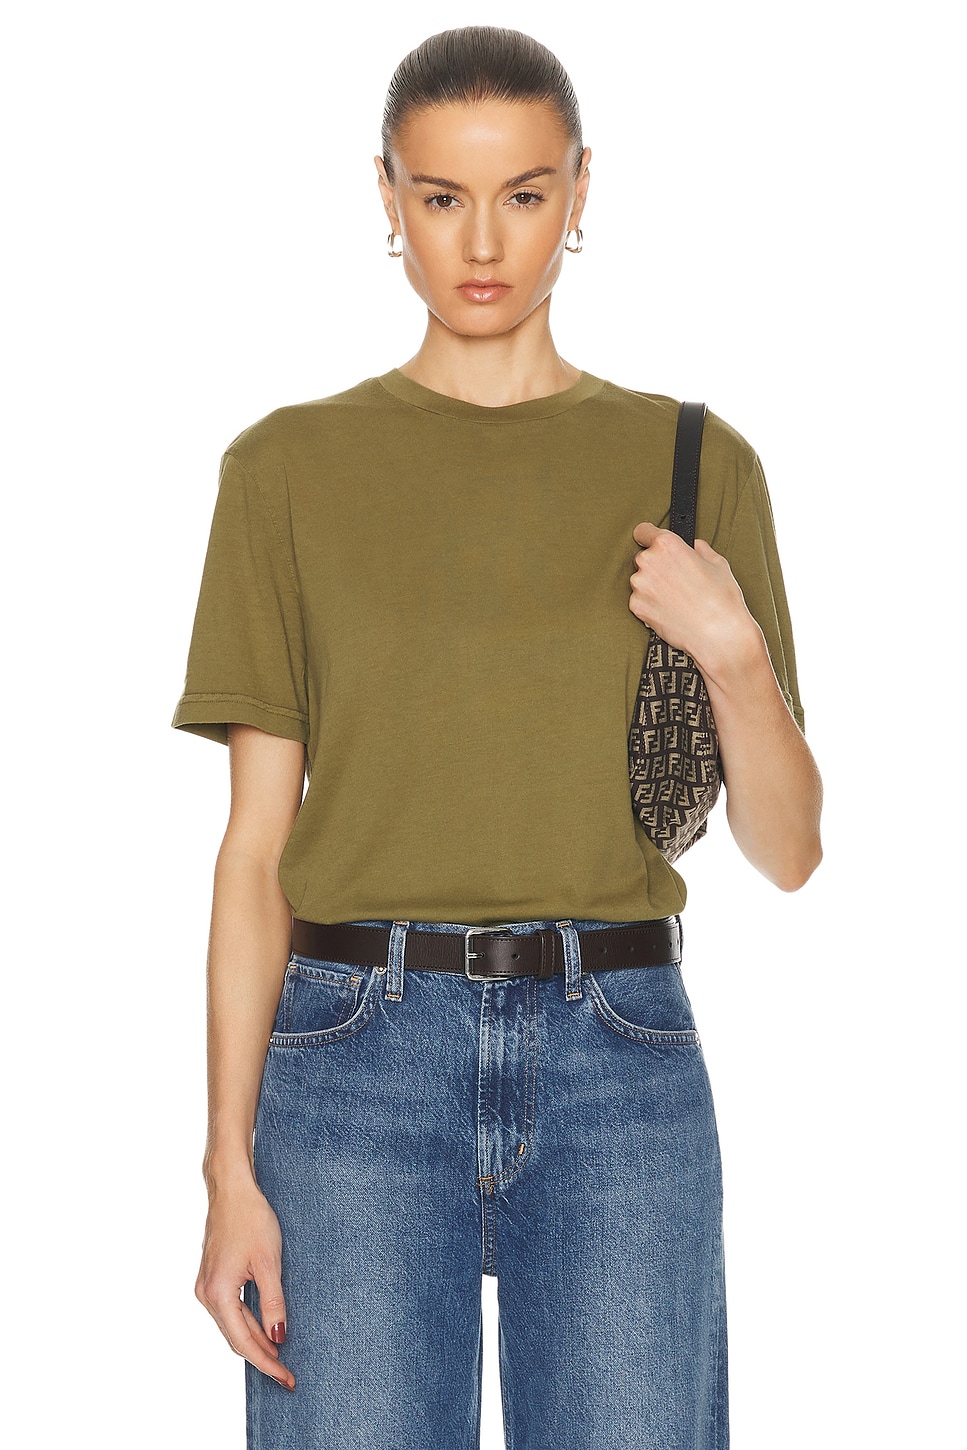 The Standard Tee in Olive